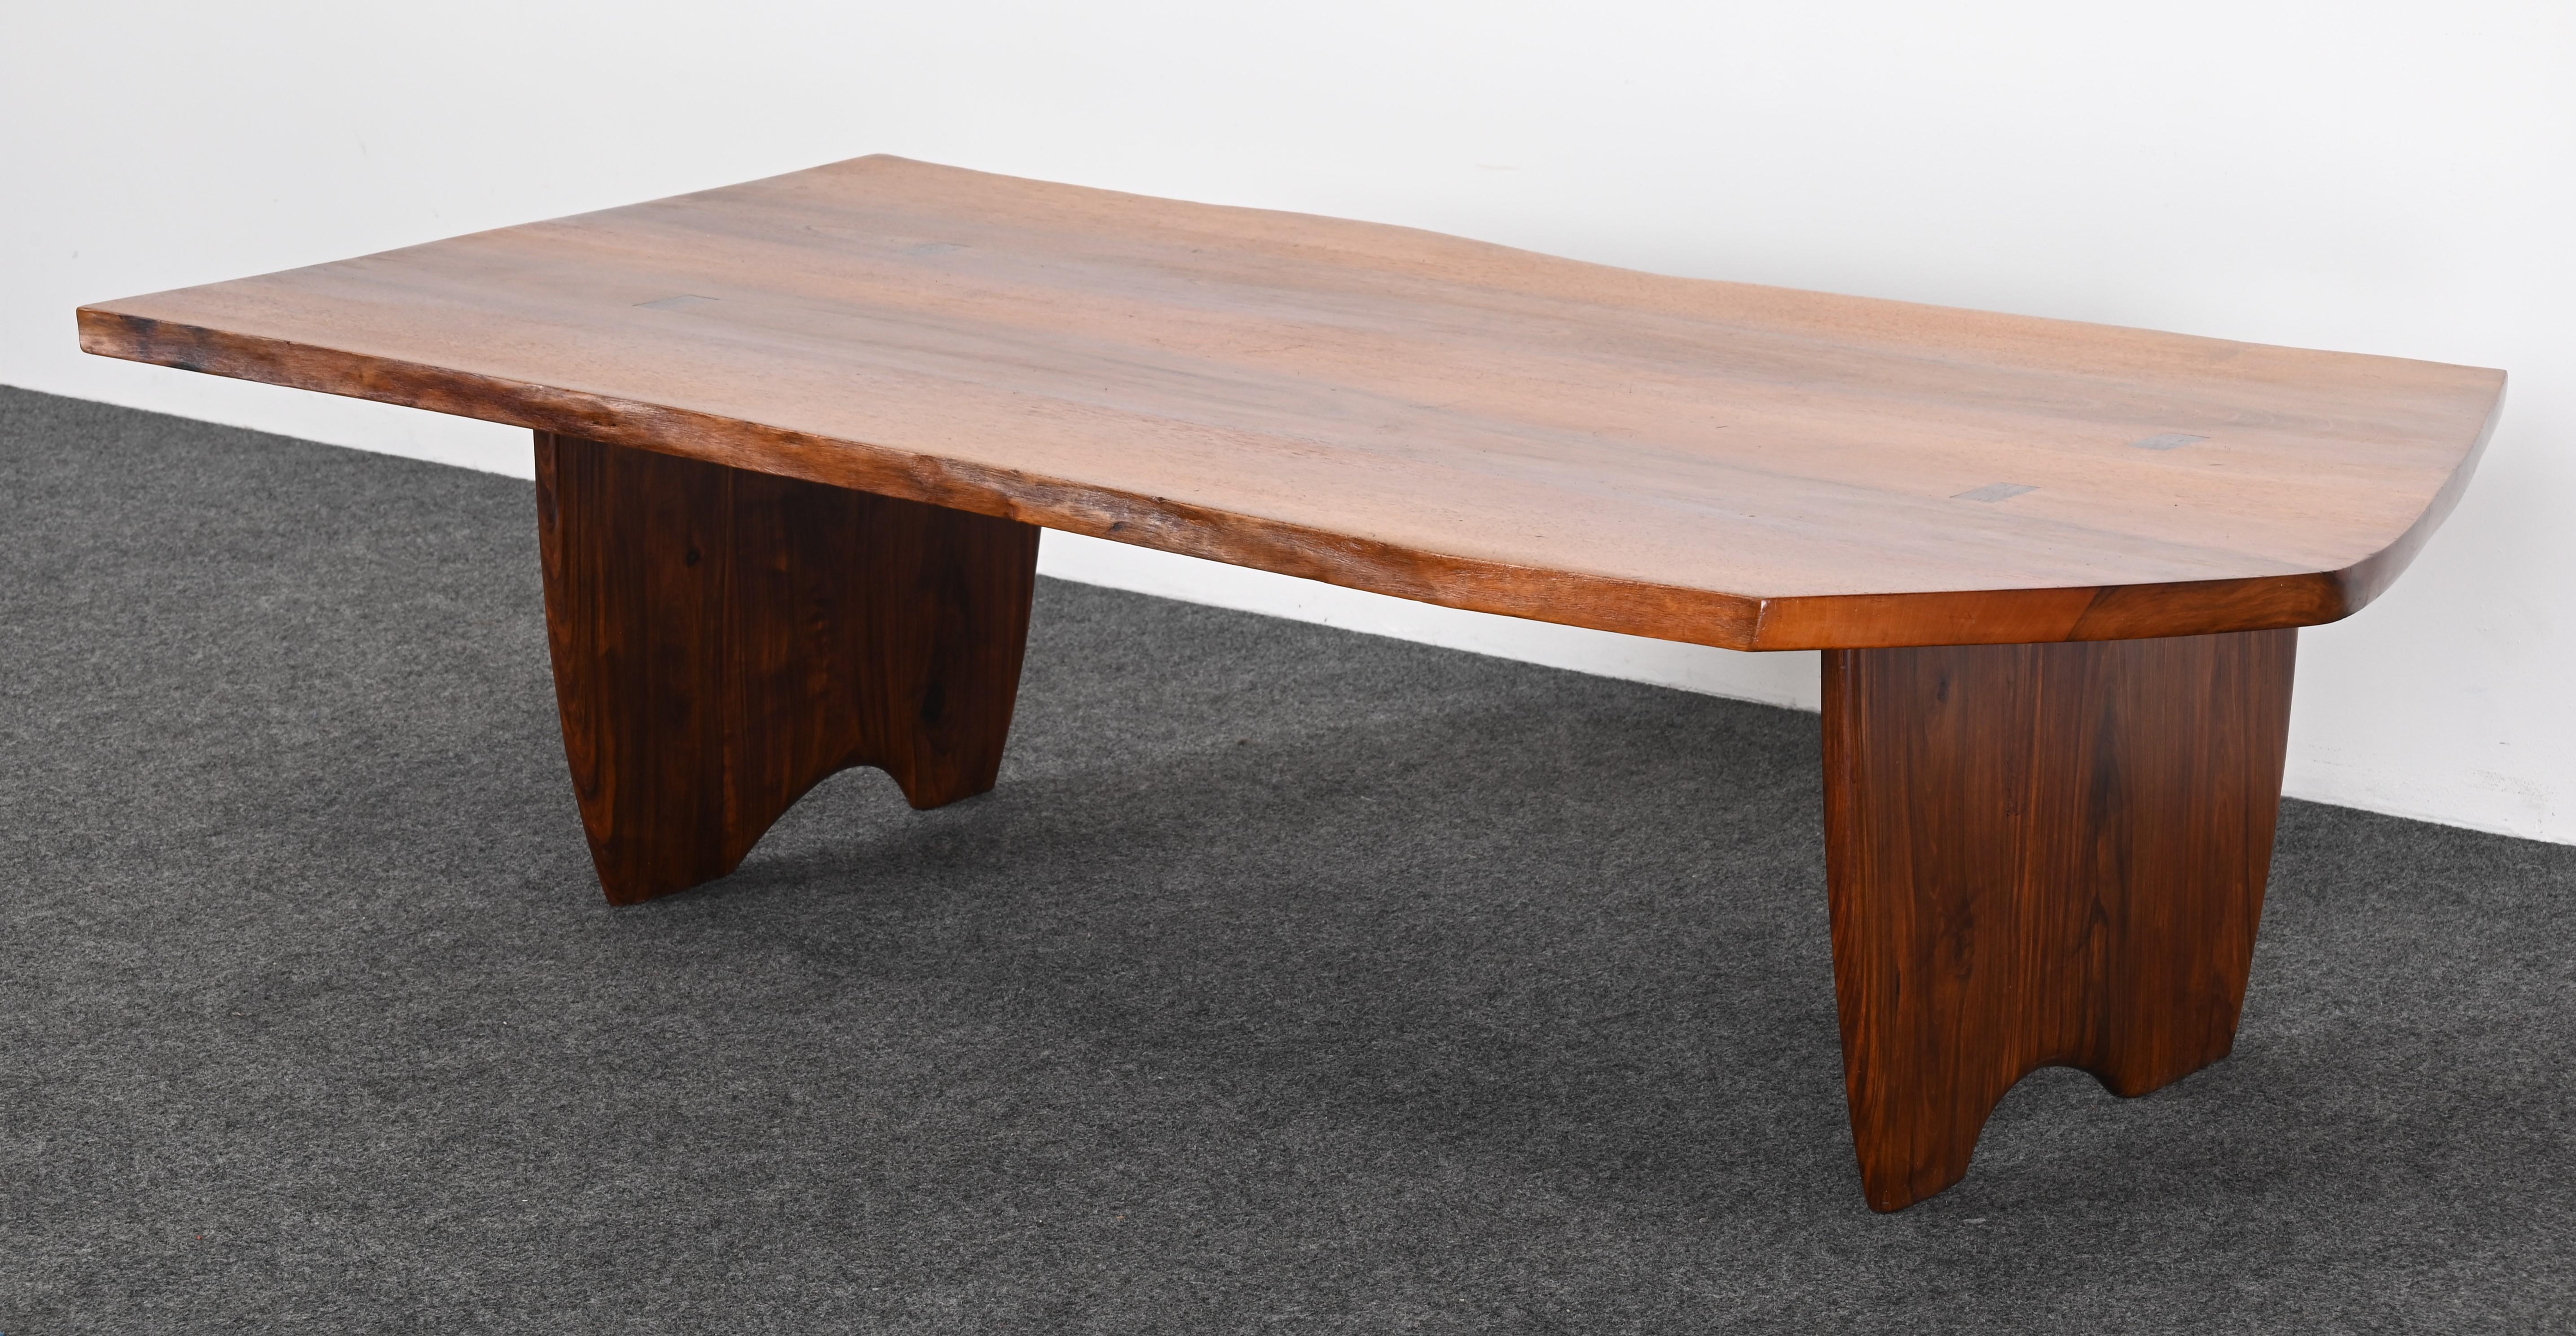 Live Edge Solid Walnut and Rosewood Coffee Table by Richard Rothbard, 1968 For Sale 3